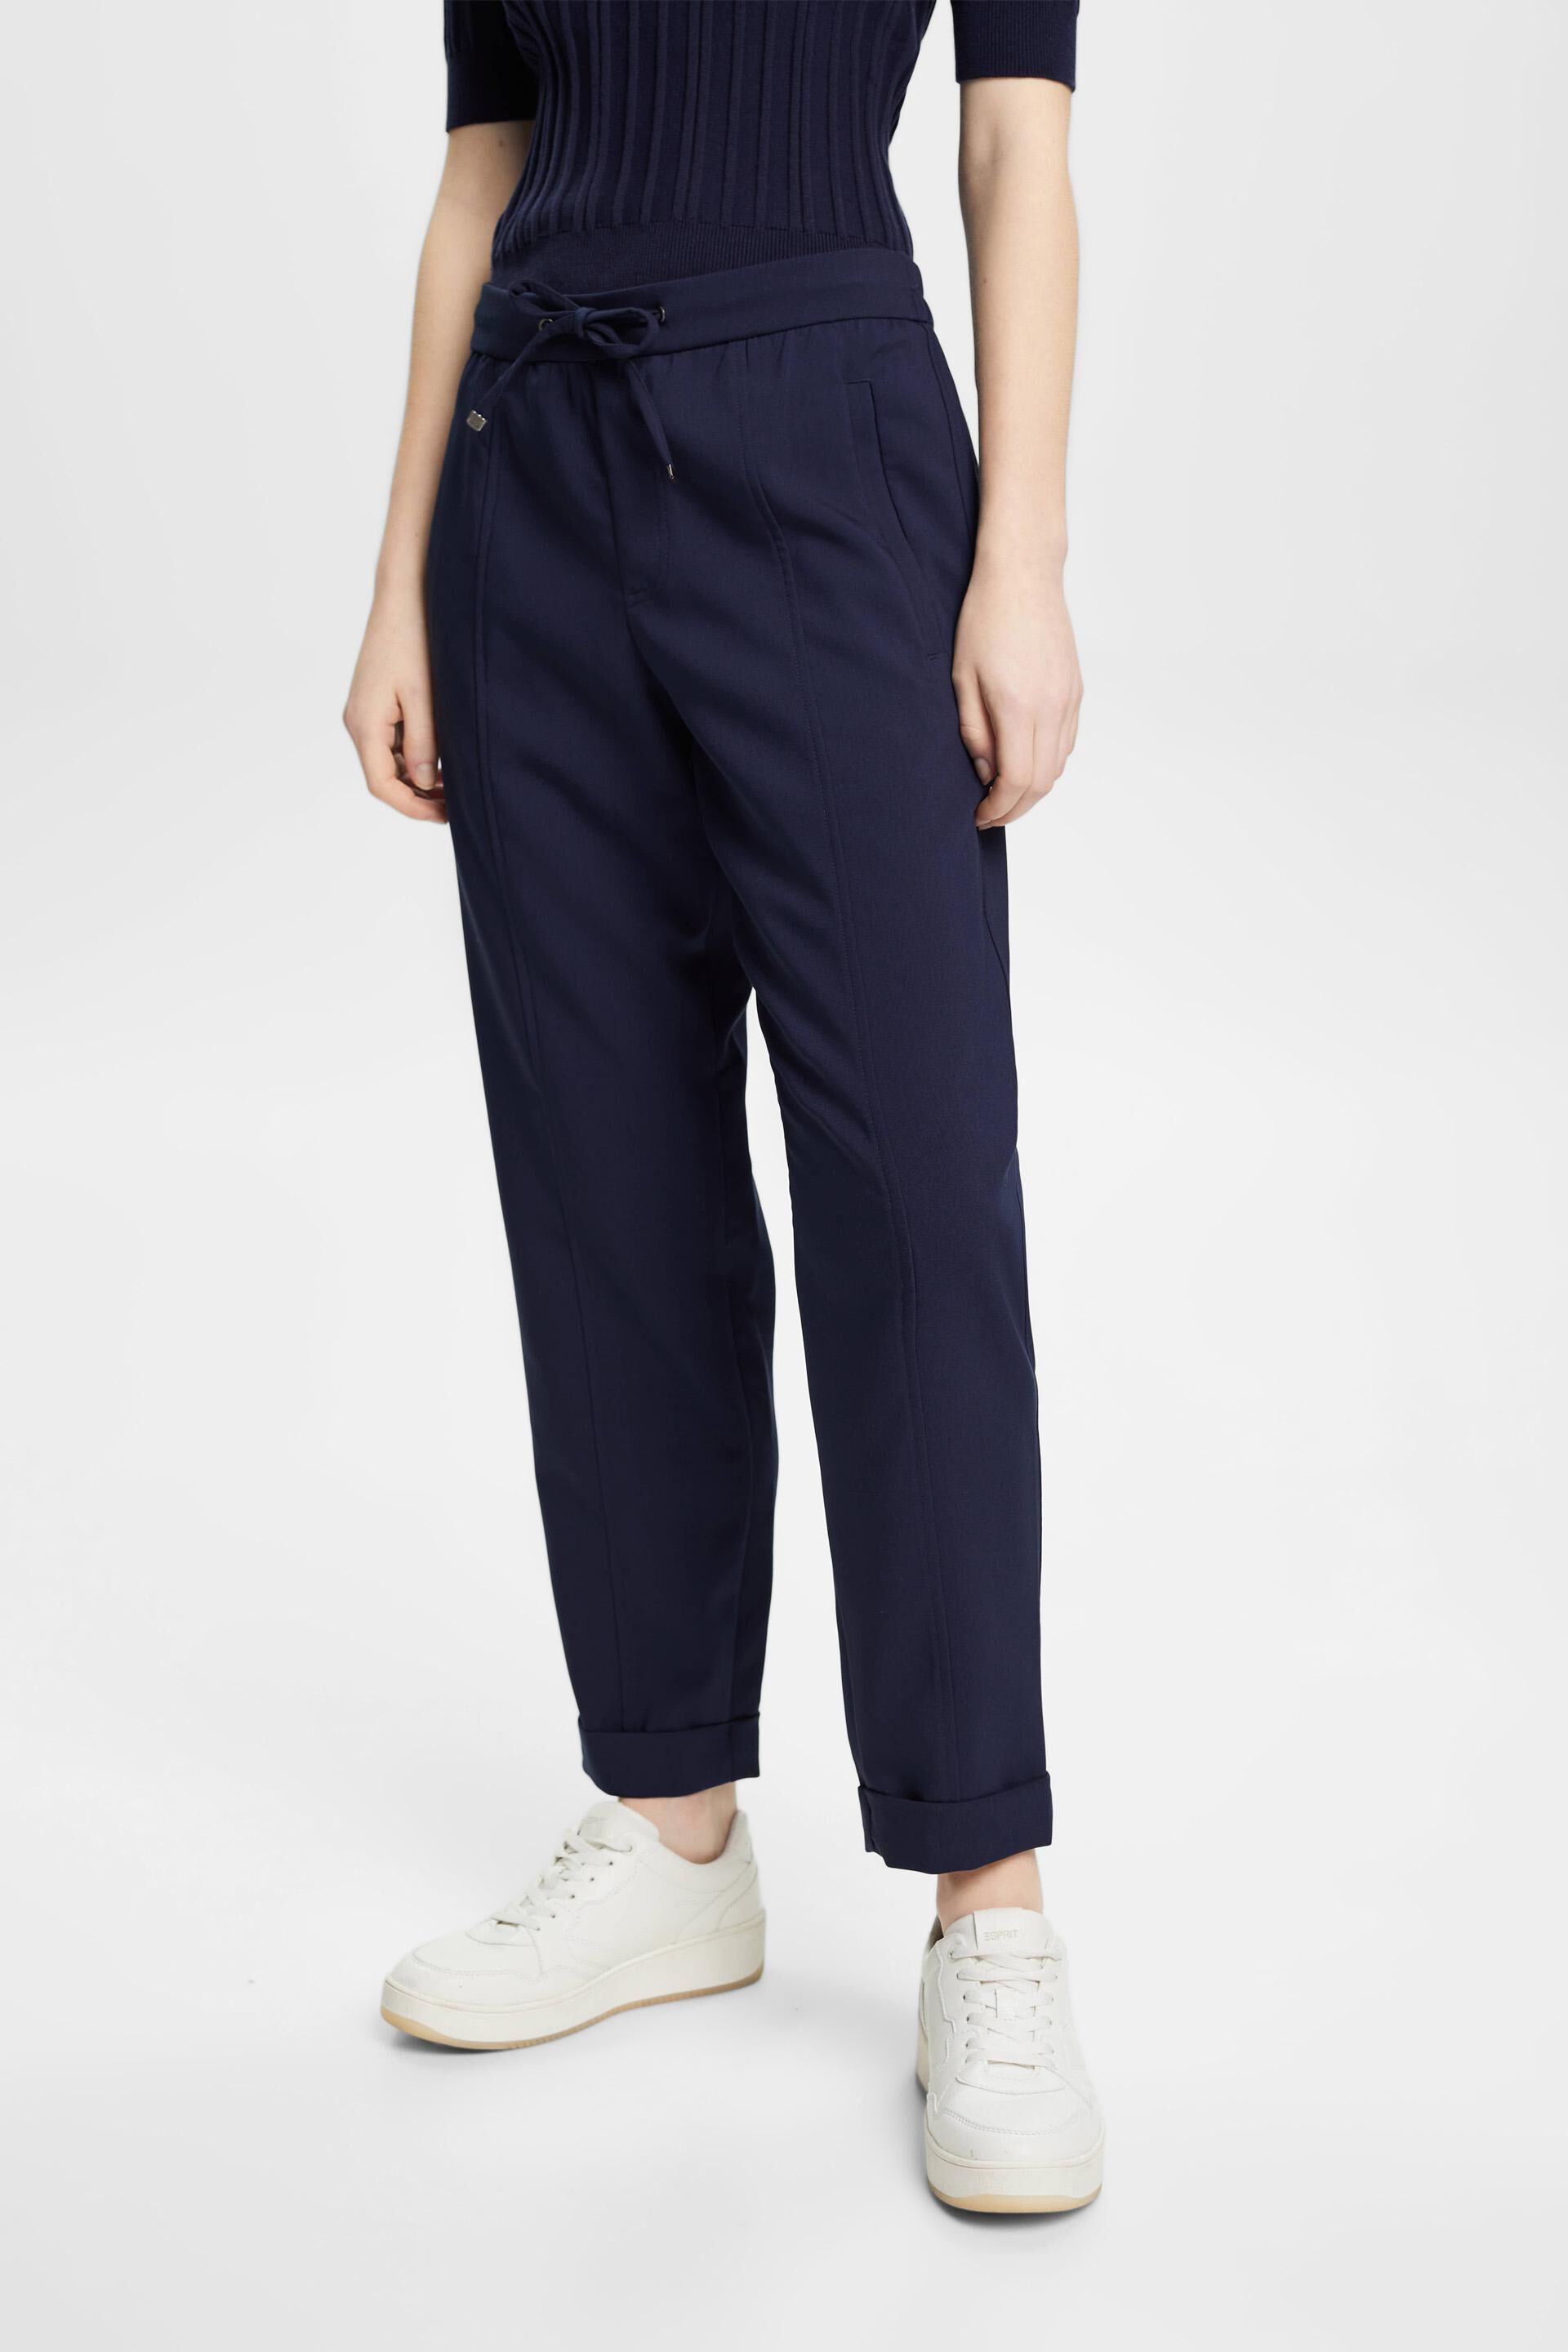 Esprit trousers style Jogger